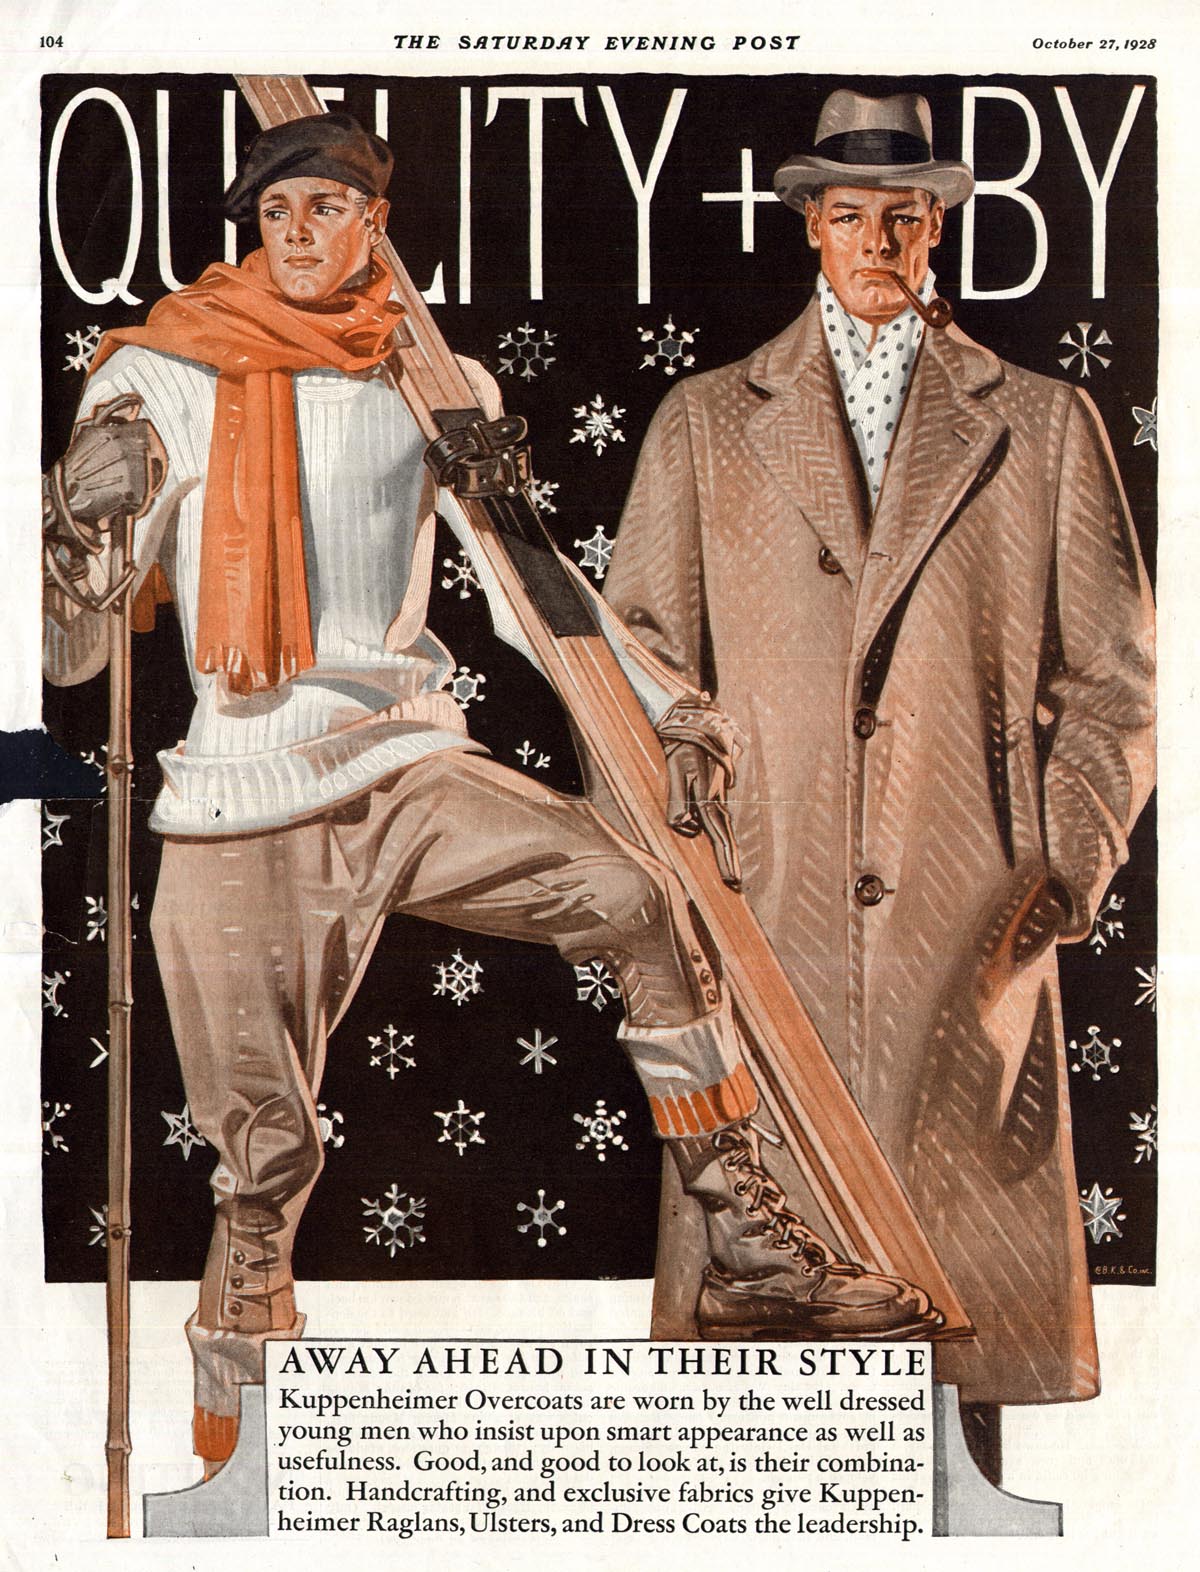 Dressing Like Heroes Vintage Men’s Fashion Ads from the 1920s